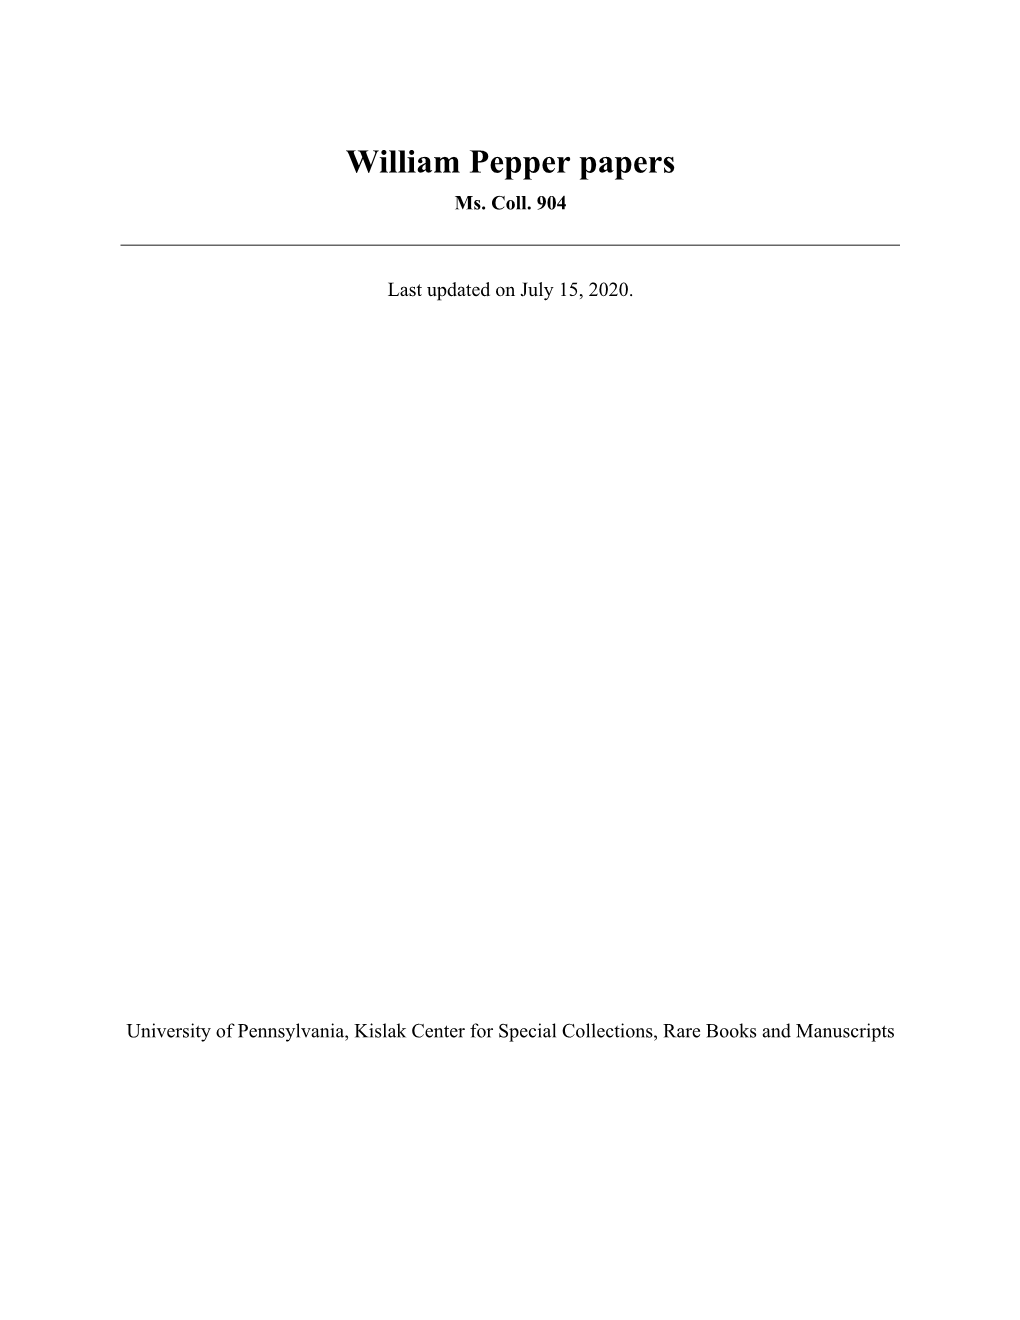 William Pepper Papers Ms